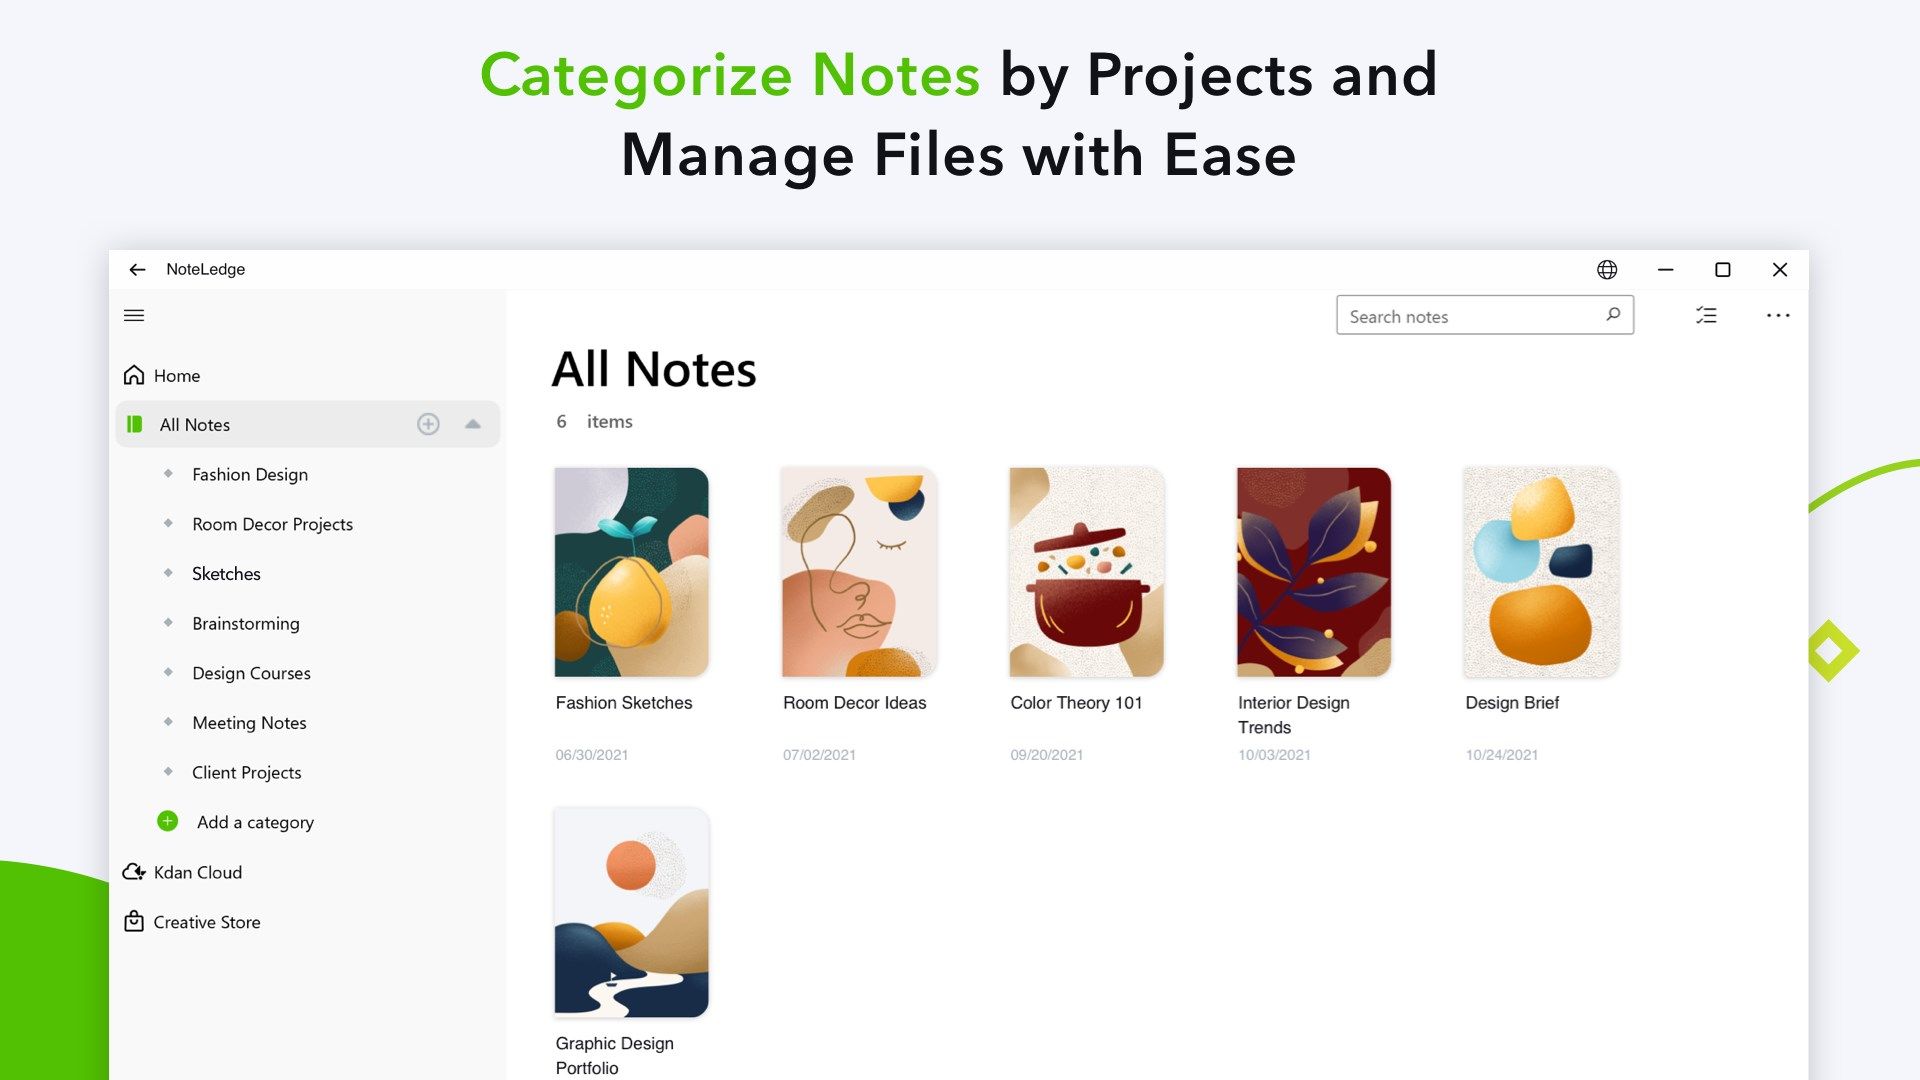 Categorize Notes by Projects and Manage Files with Ease